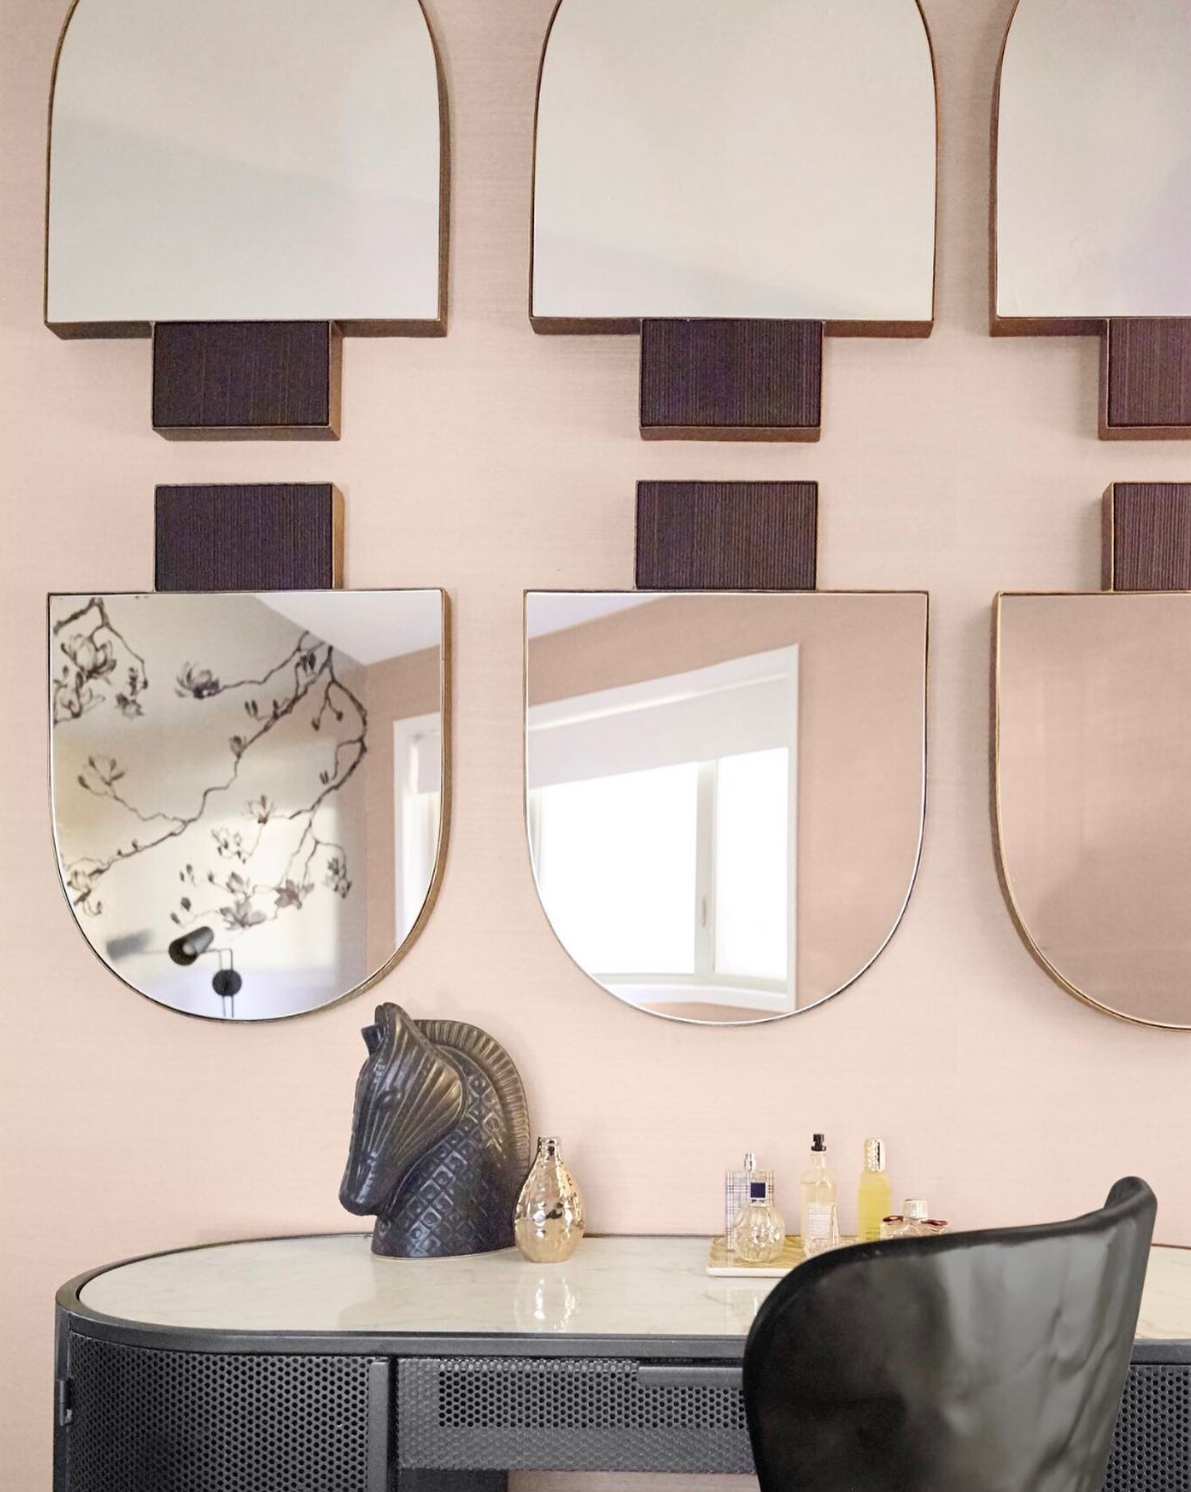 six of the mirrors positioned on a wall in stylish pattern